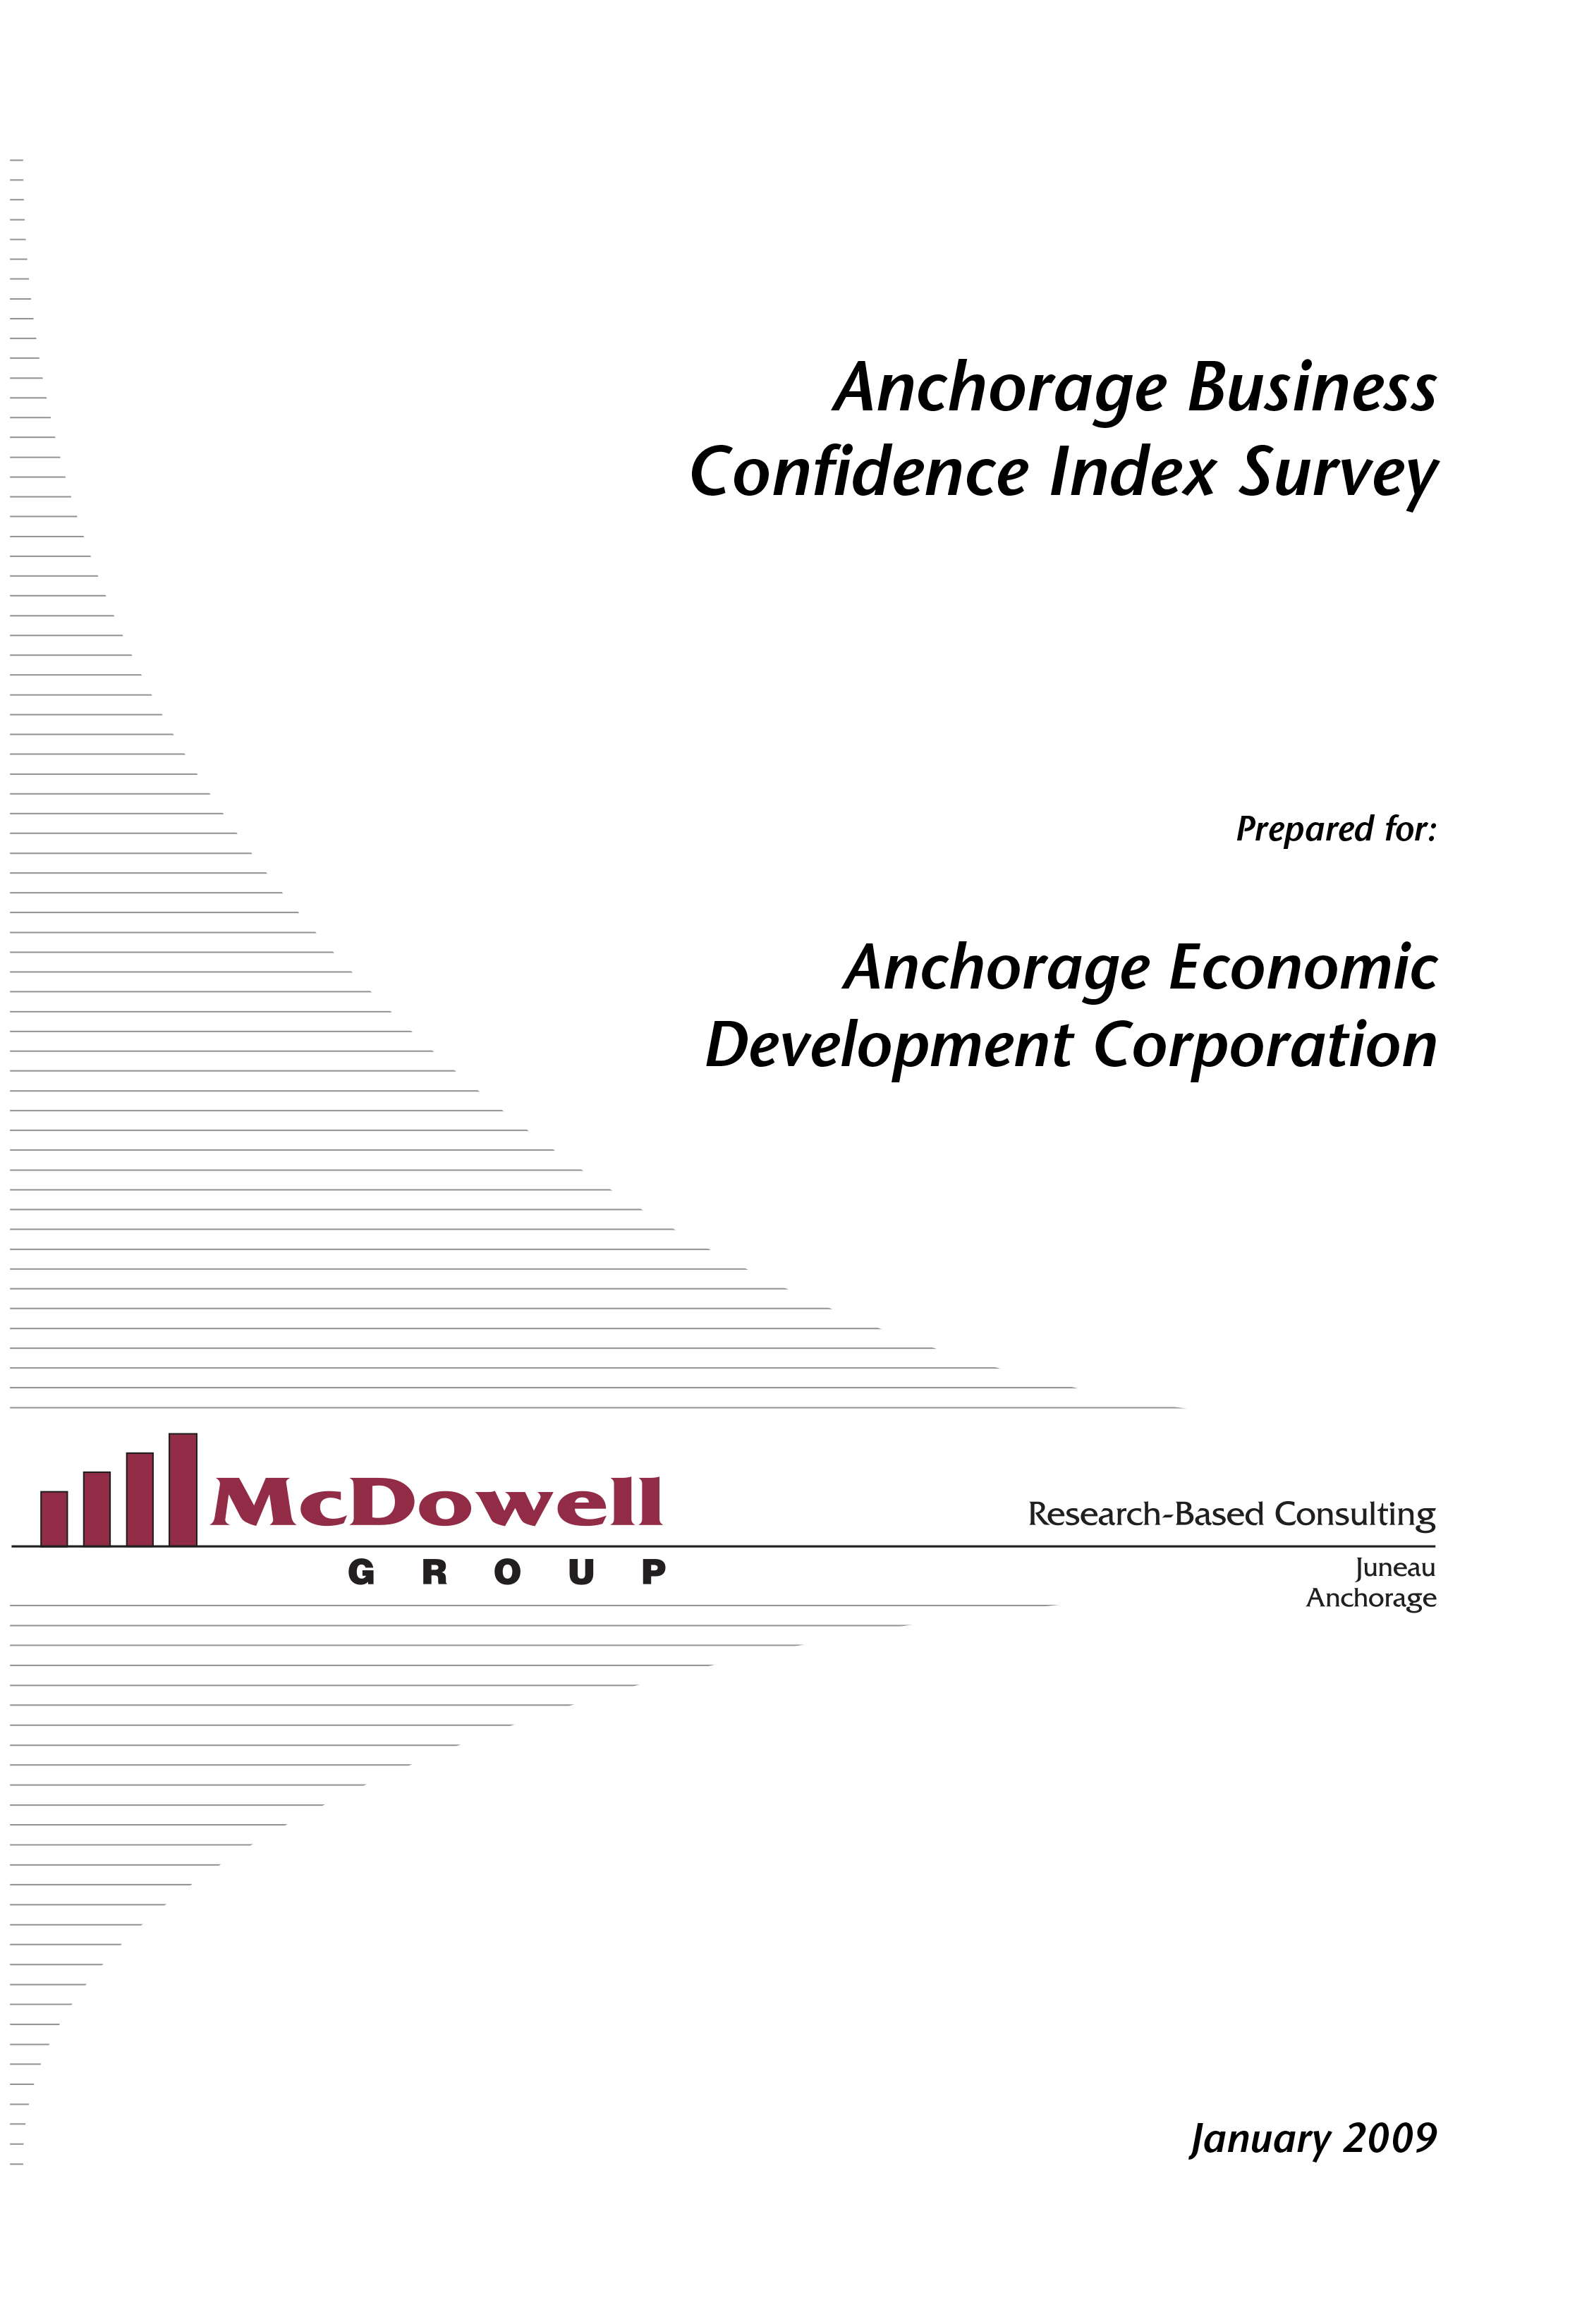 Business Confidence Index Report: 2009